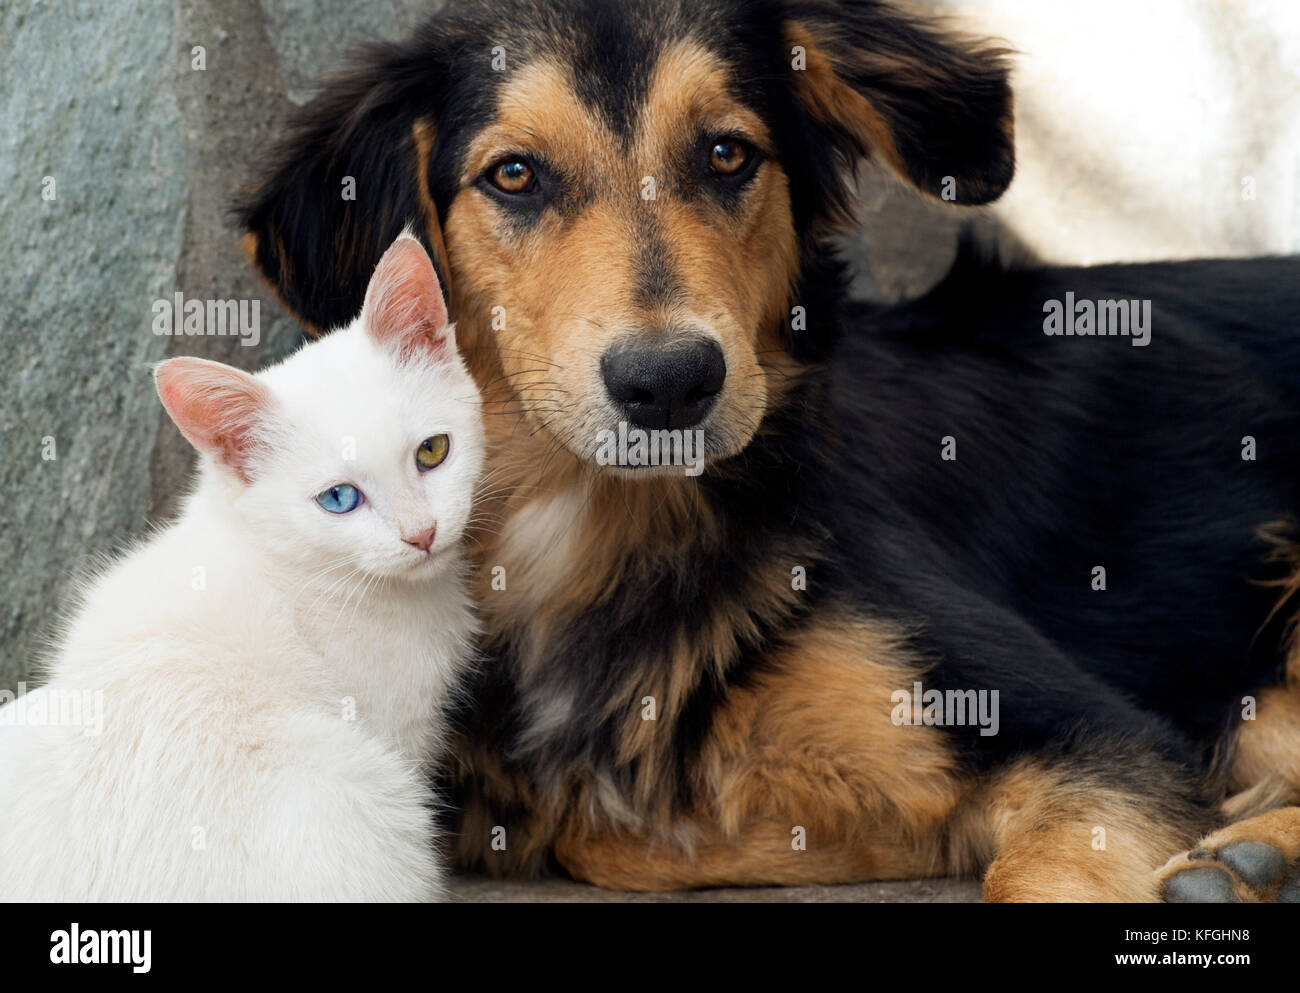 Close up of a white kitten and a young dog sitting side by side and looking at camera Stock Photo